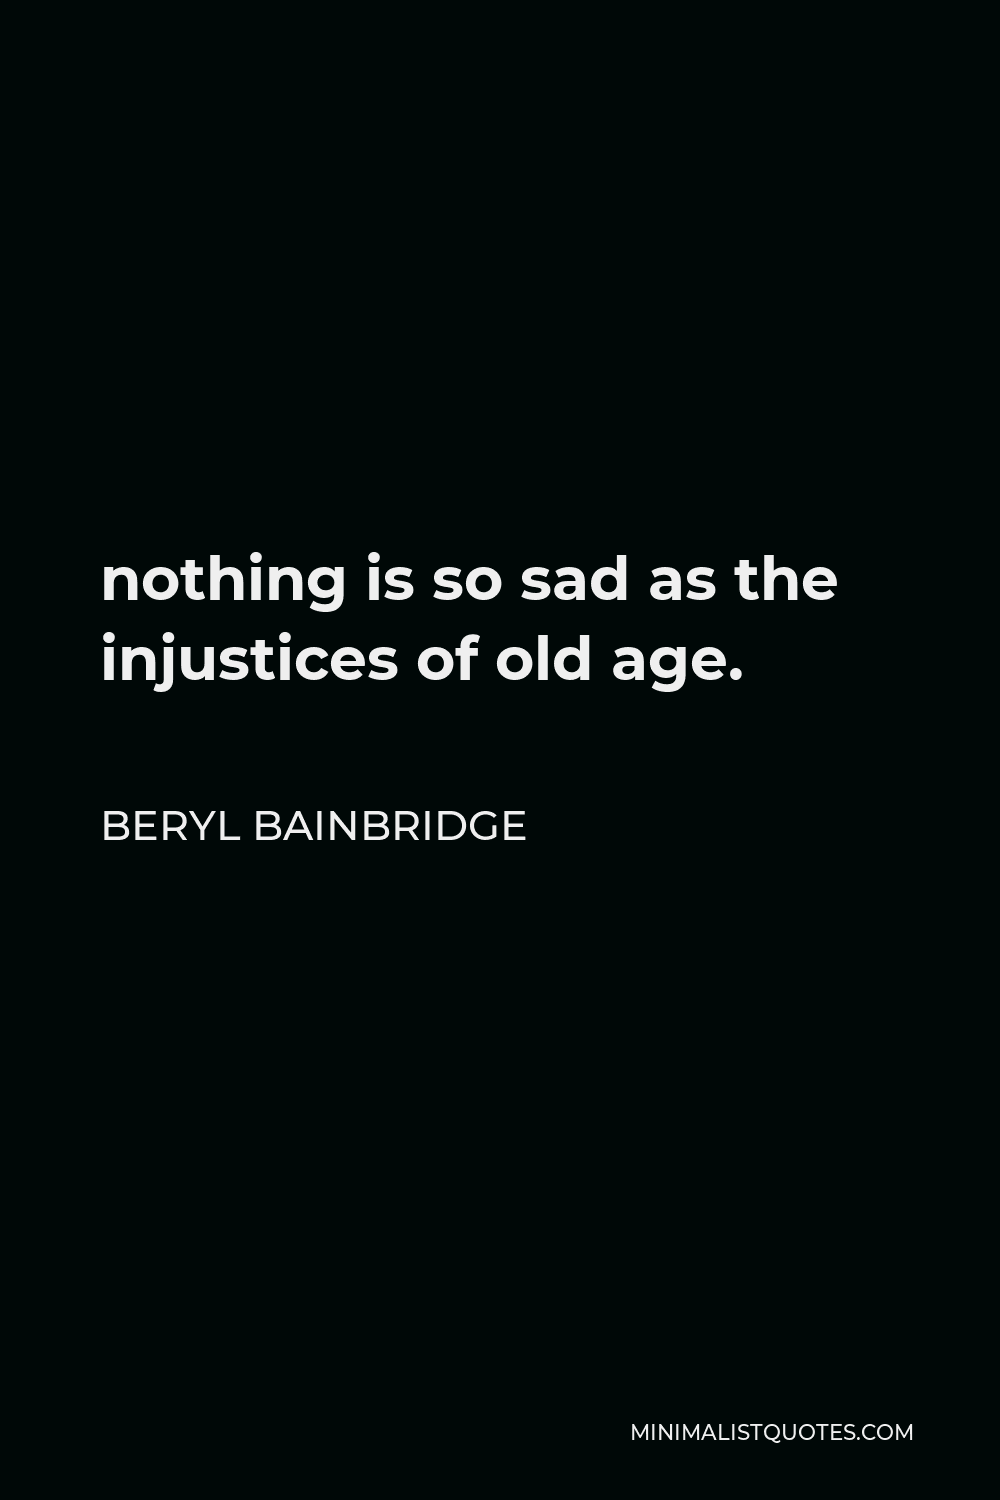 Beryl Bainbridge Quote - nothing is so sad as the injustices of old age.